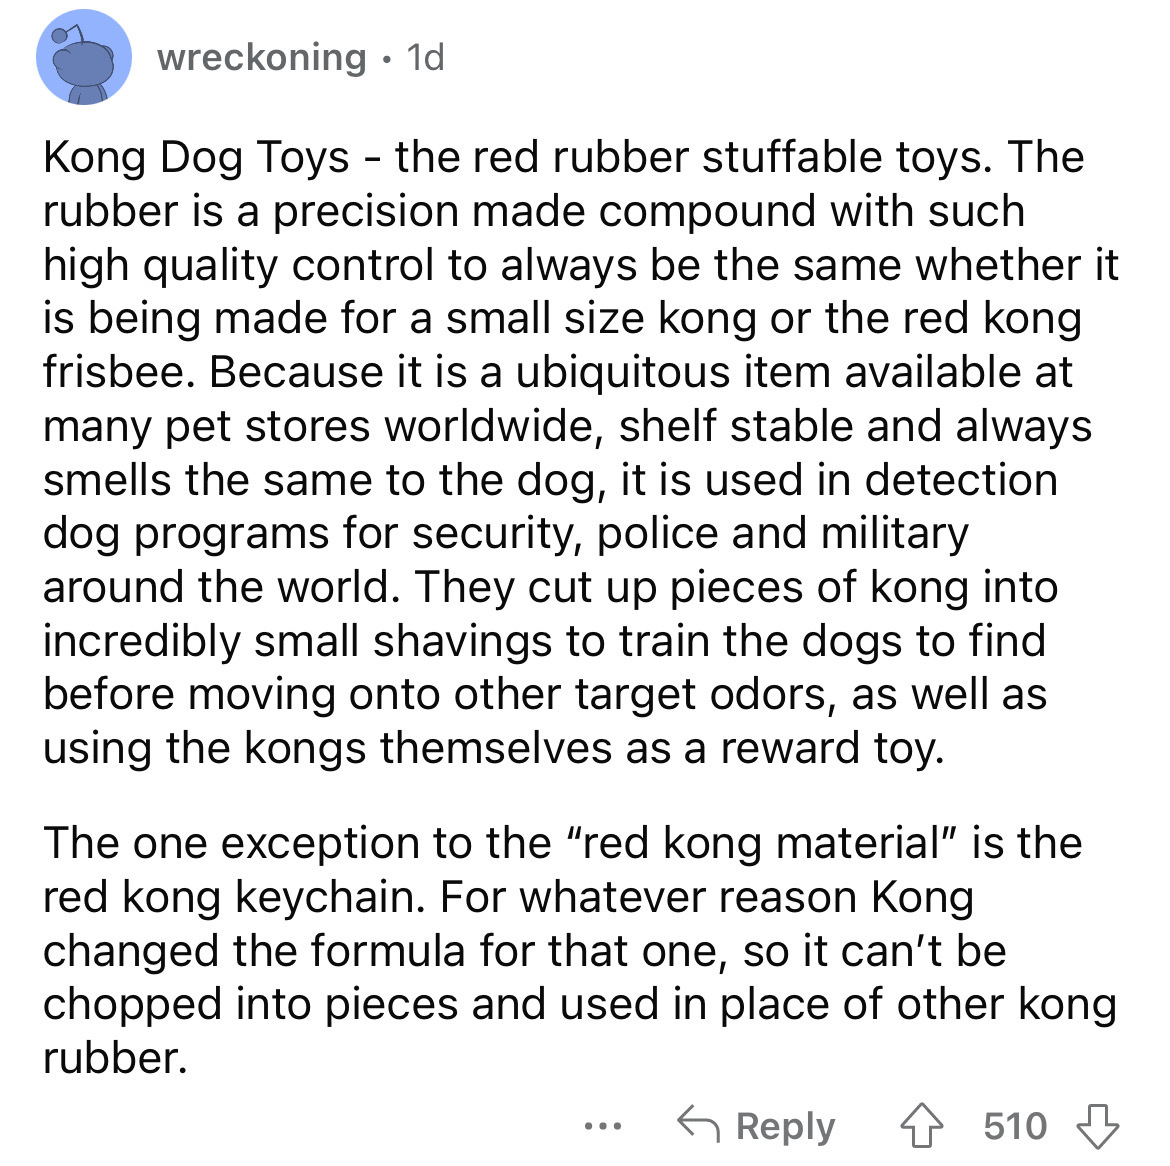 document - wreckoning 1d Kong Dog Toys the red rubber stuffable toys. The rubber is a precision made compound with such high quality control to always be the same whether it is being made for a small size kong or the red kong frisbee. Because it is a ubiq